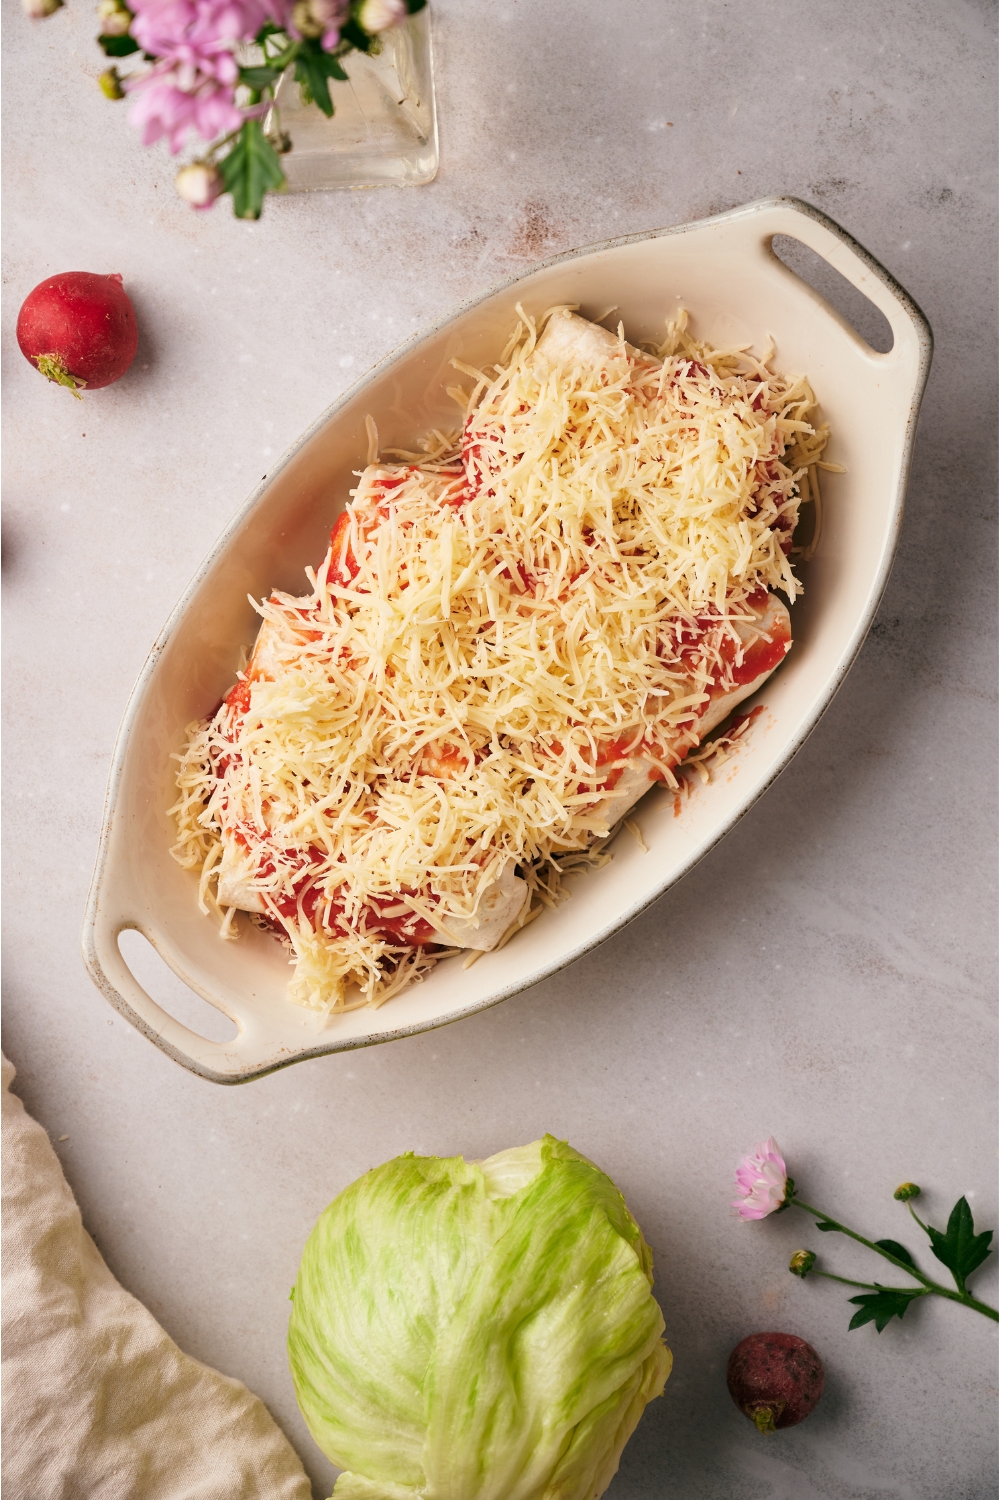 A baking dish filled with unbaked burrito casserole covered in a layer of shredded cheese.